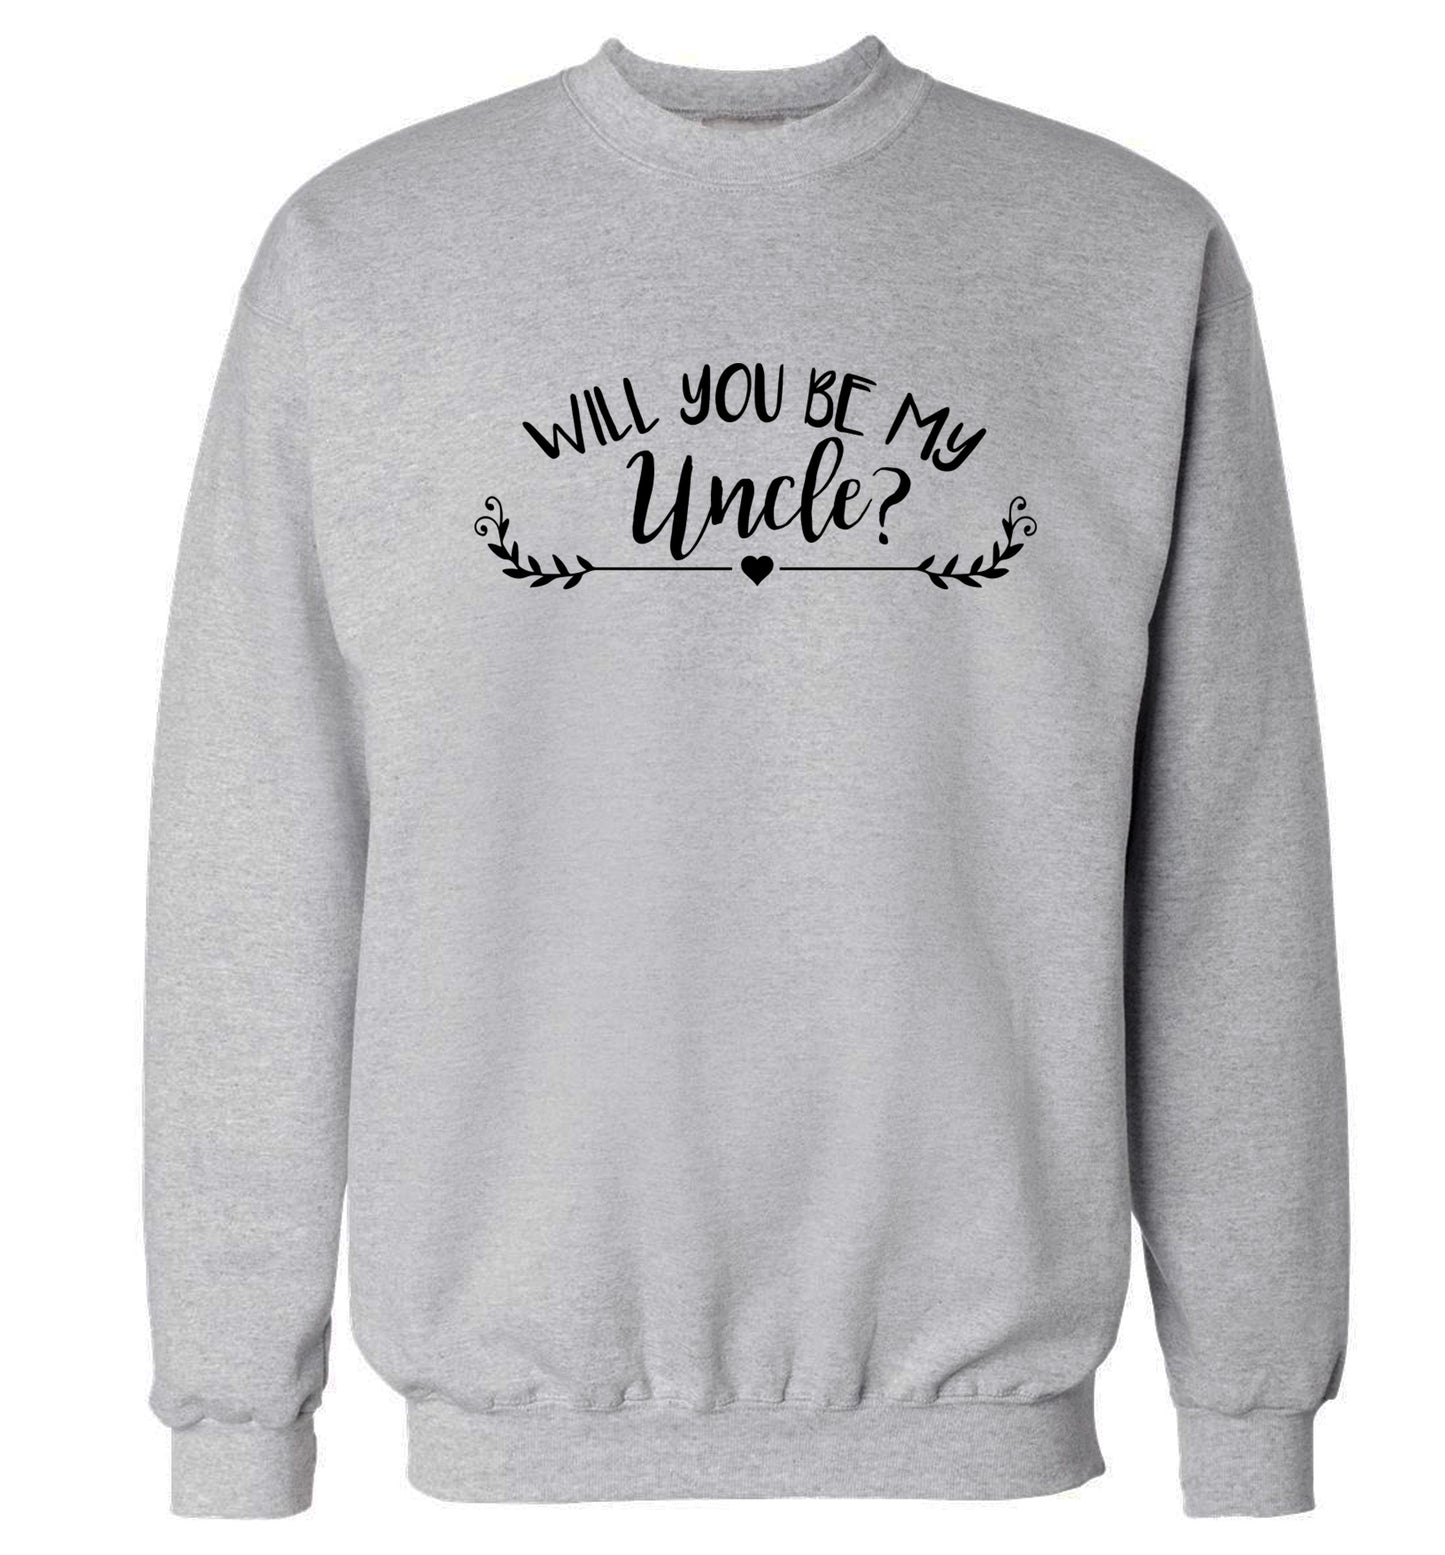 Will you be my uncle? Adult's unisex grey Sweater 2XL